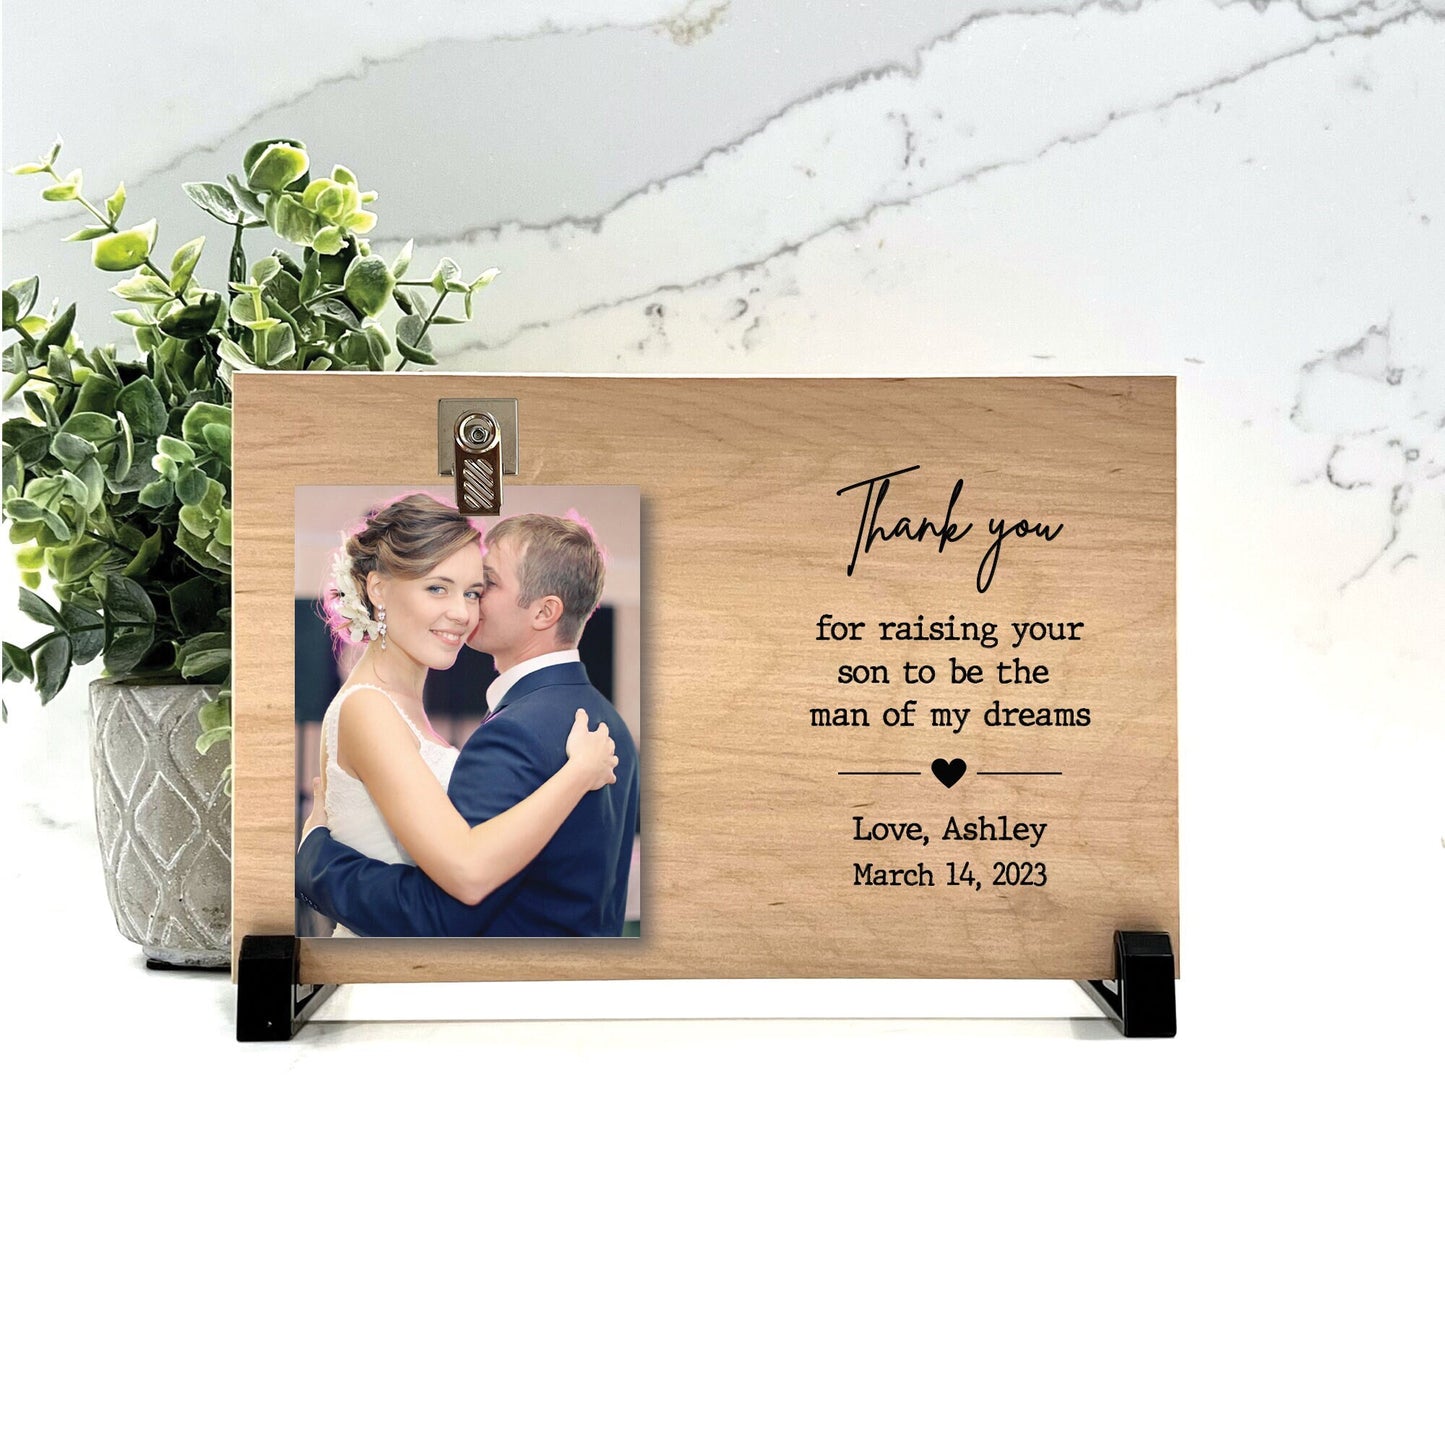 Thank You for raising your son to be the man of my dreams - gift frame for Mother of the Groom from Bride